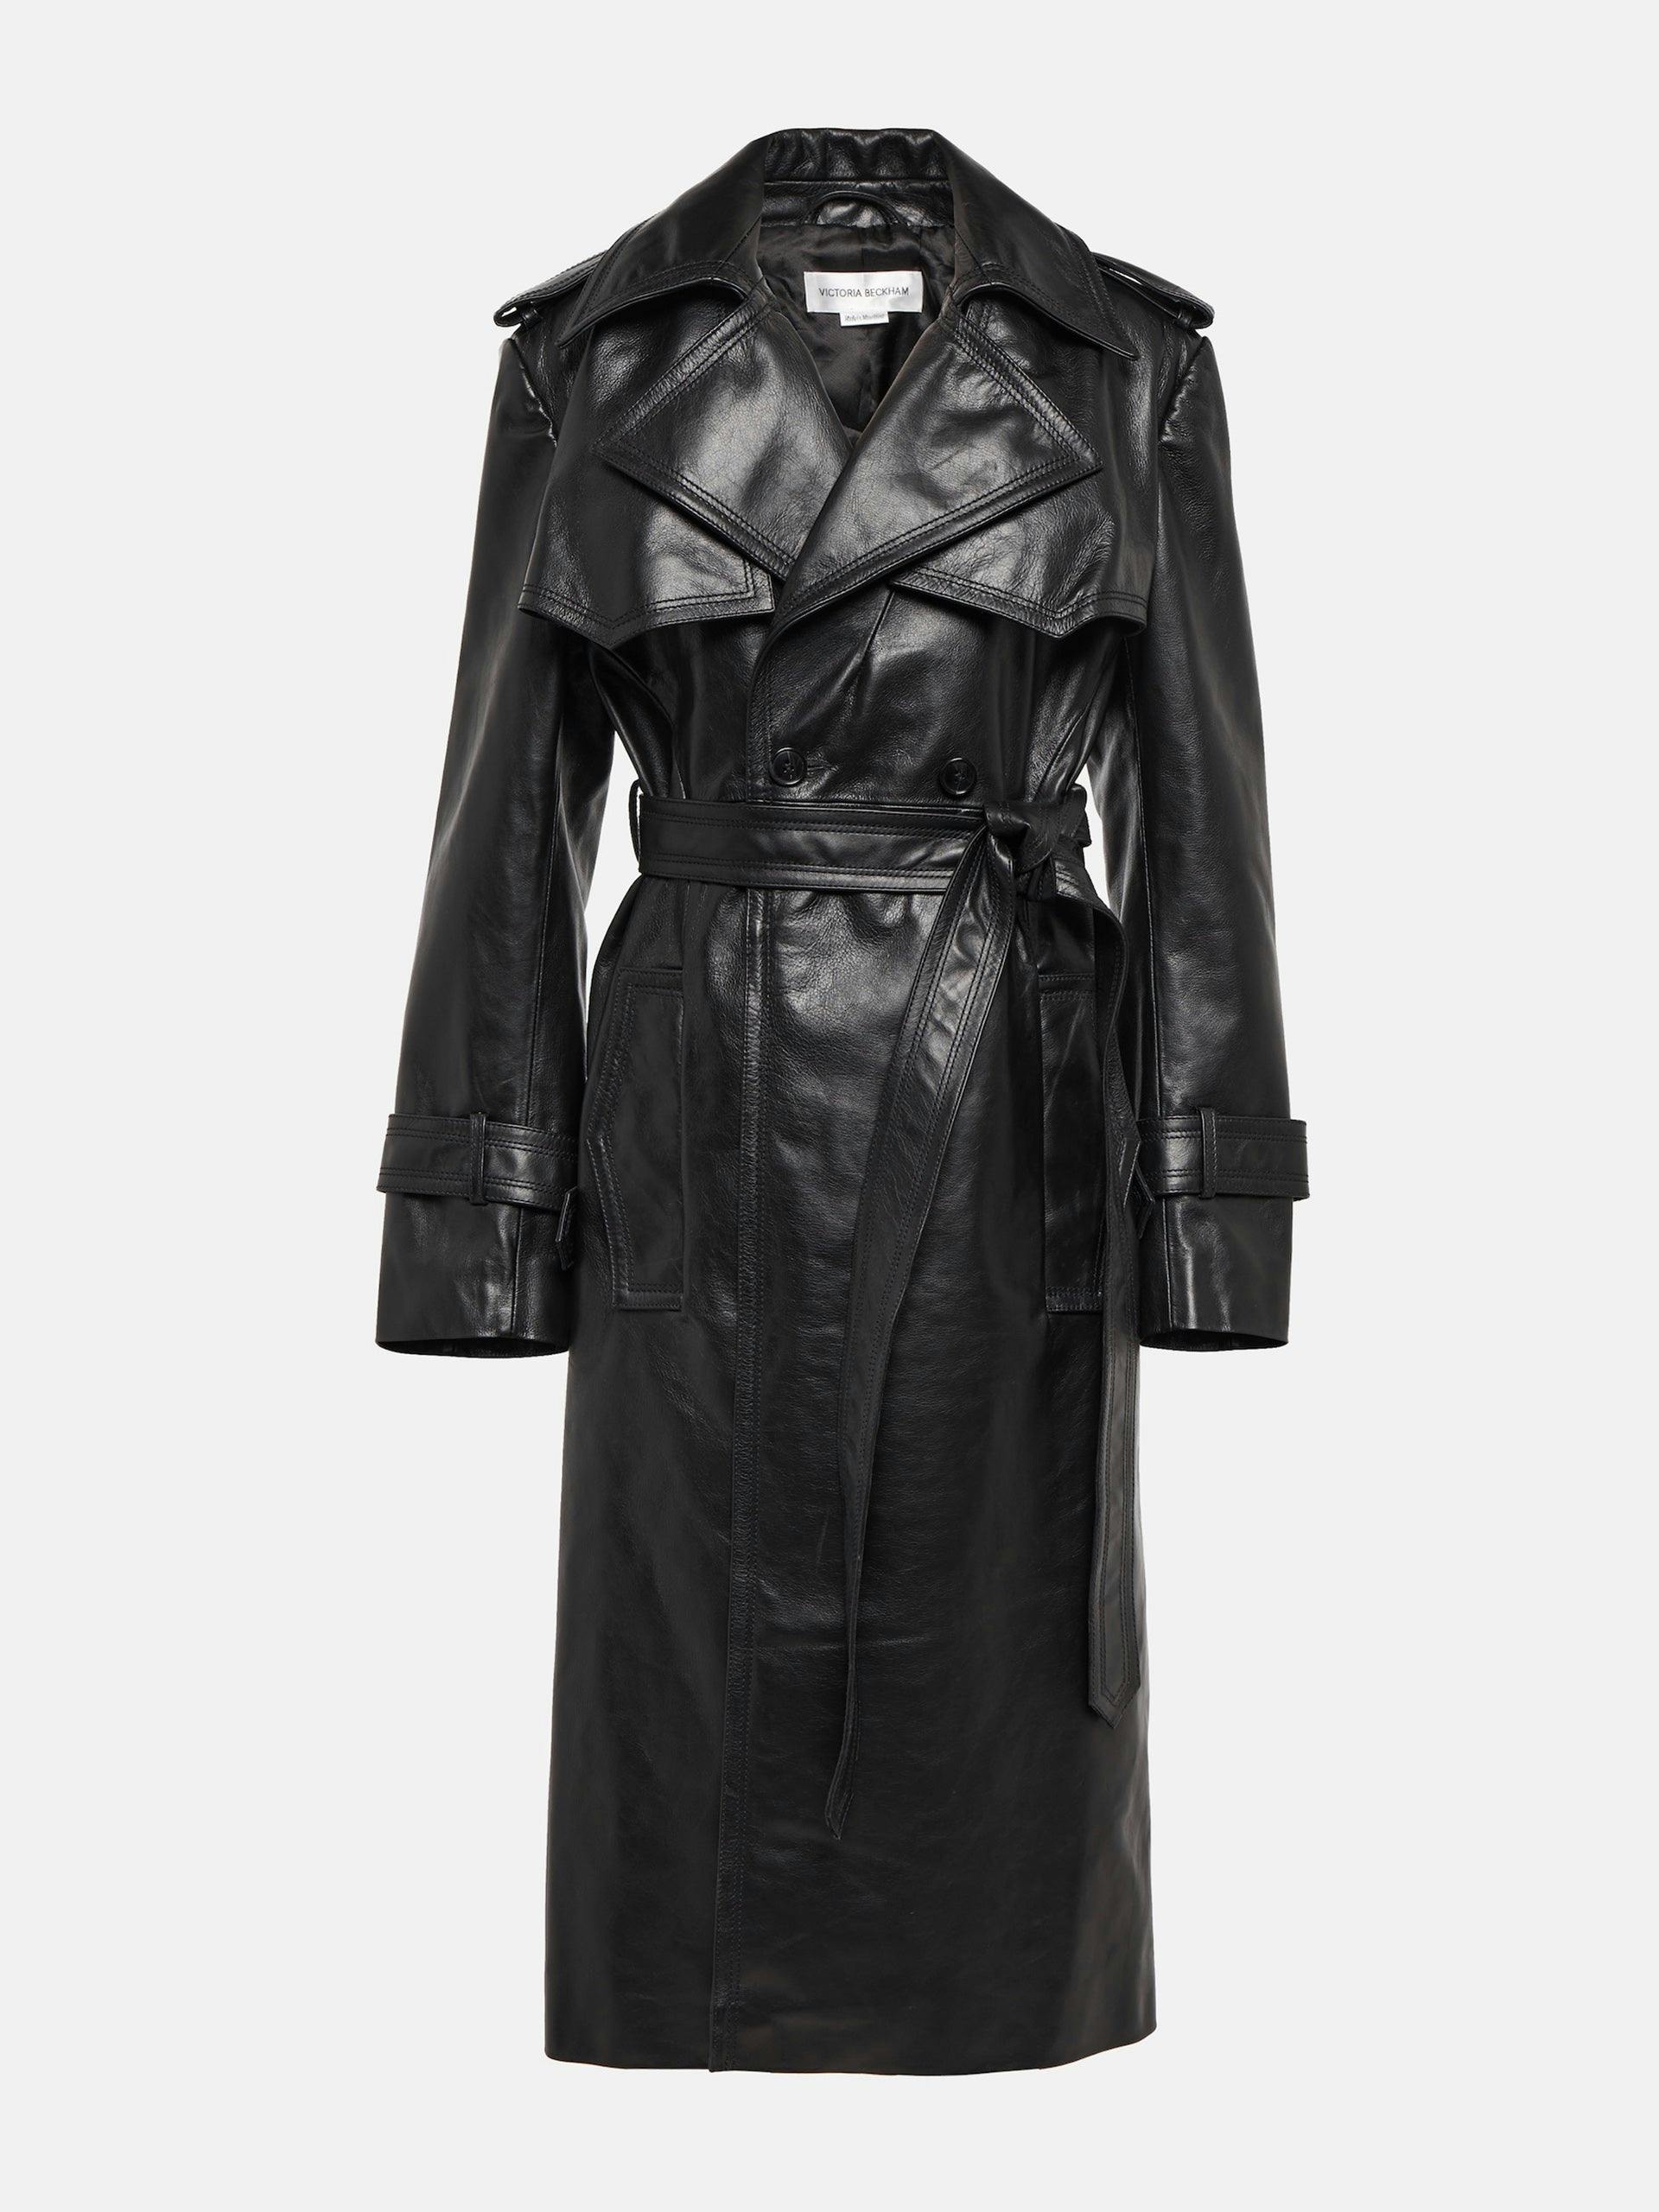 Black leather trench coat with belt